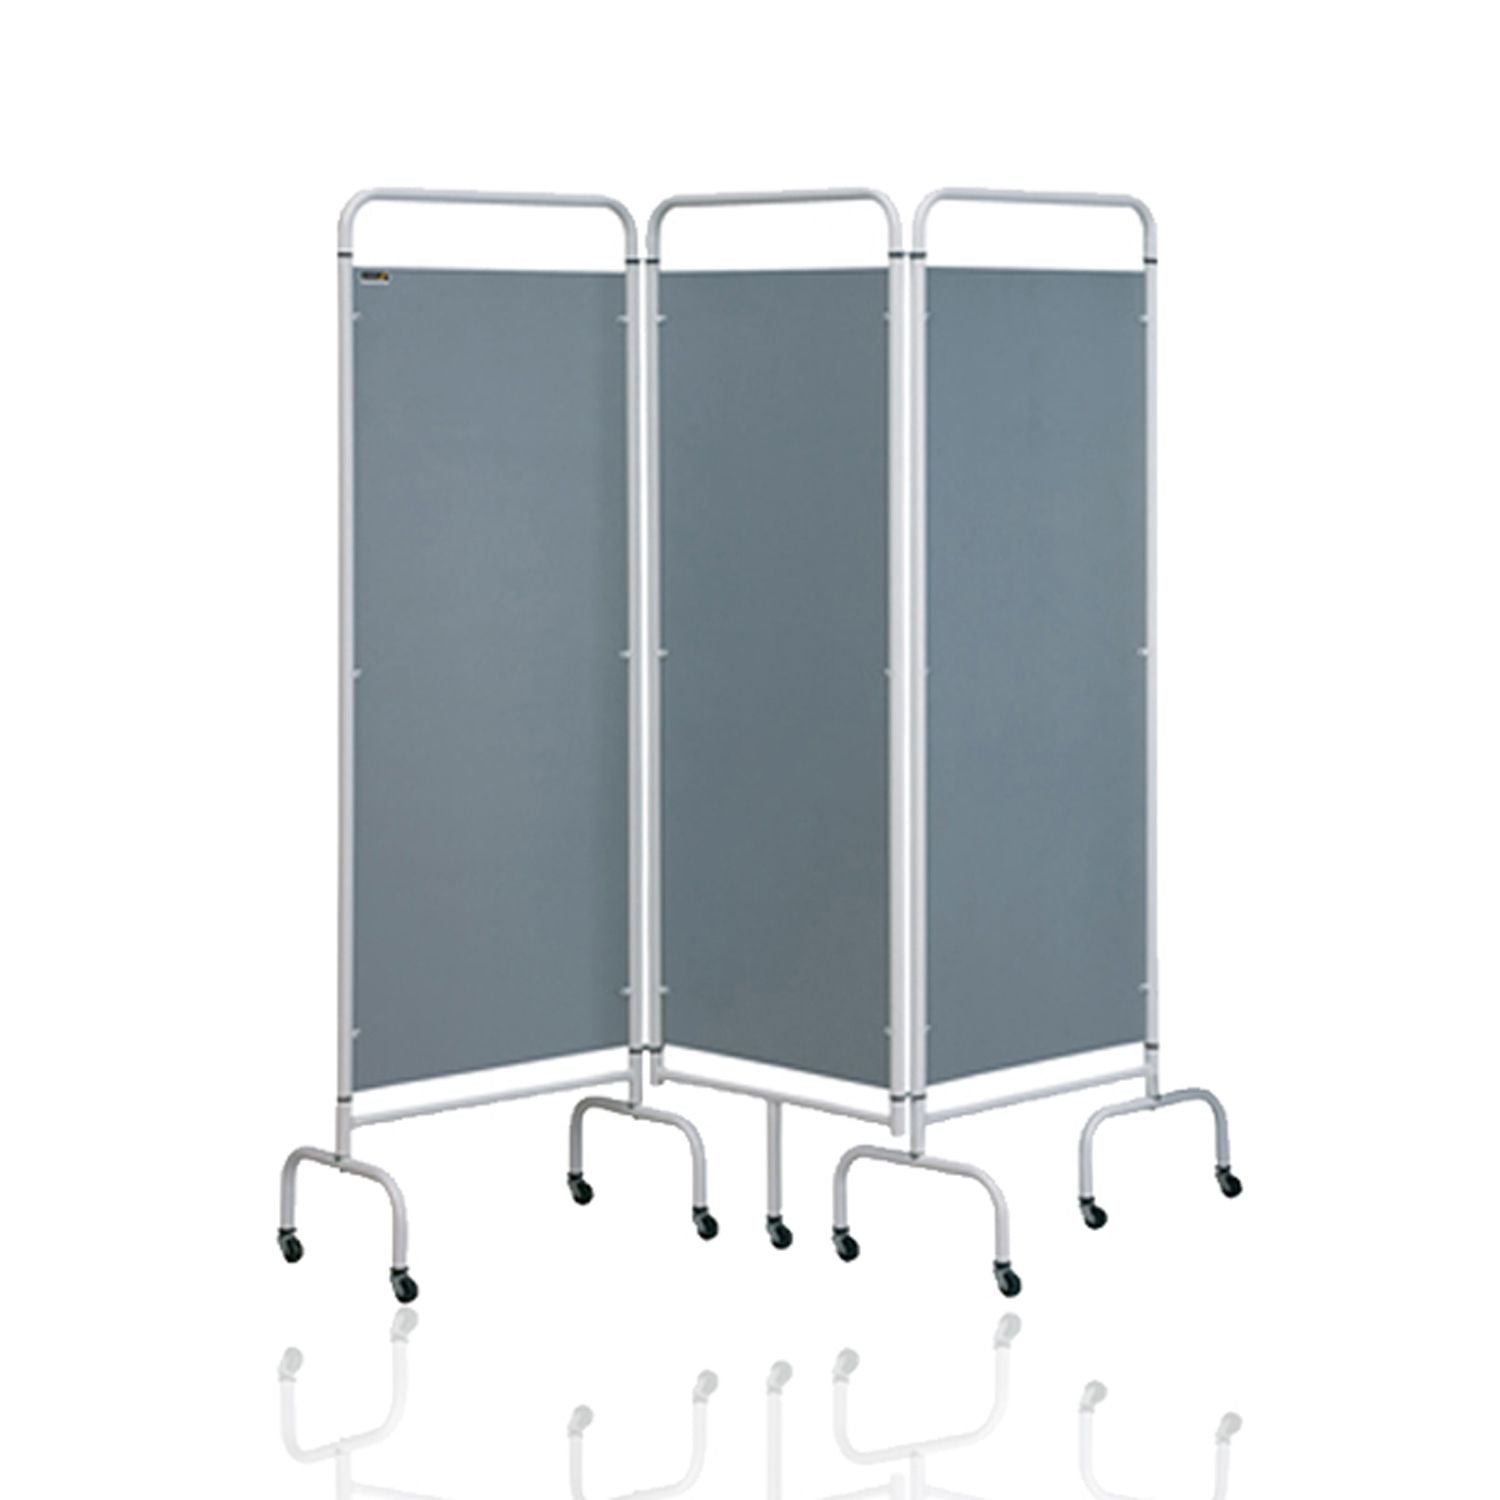 Sunflower 3 Section Mobile Folding Screen with Hygienic Disposable Curtains (3)